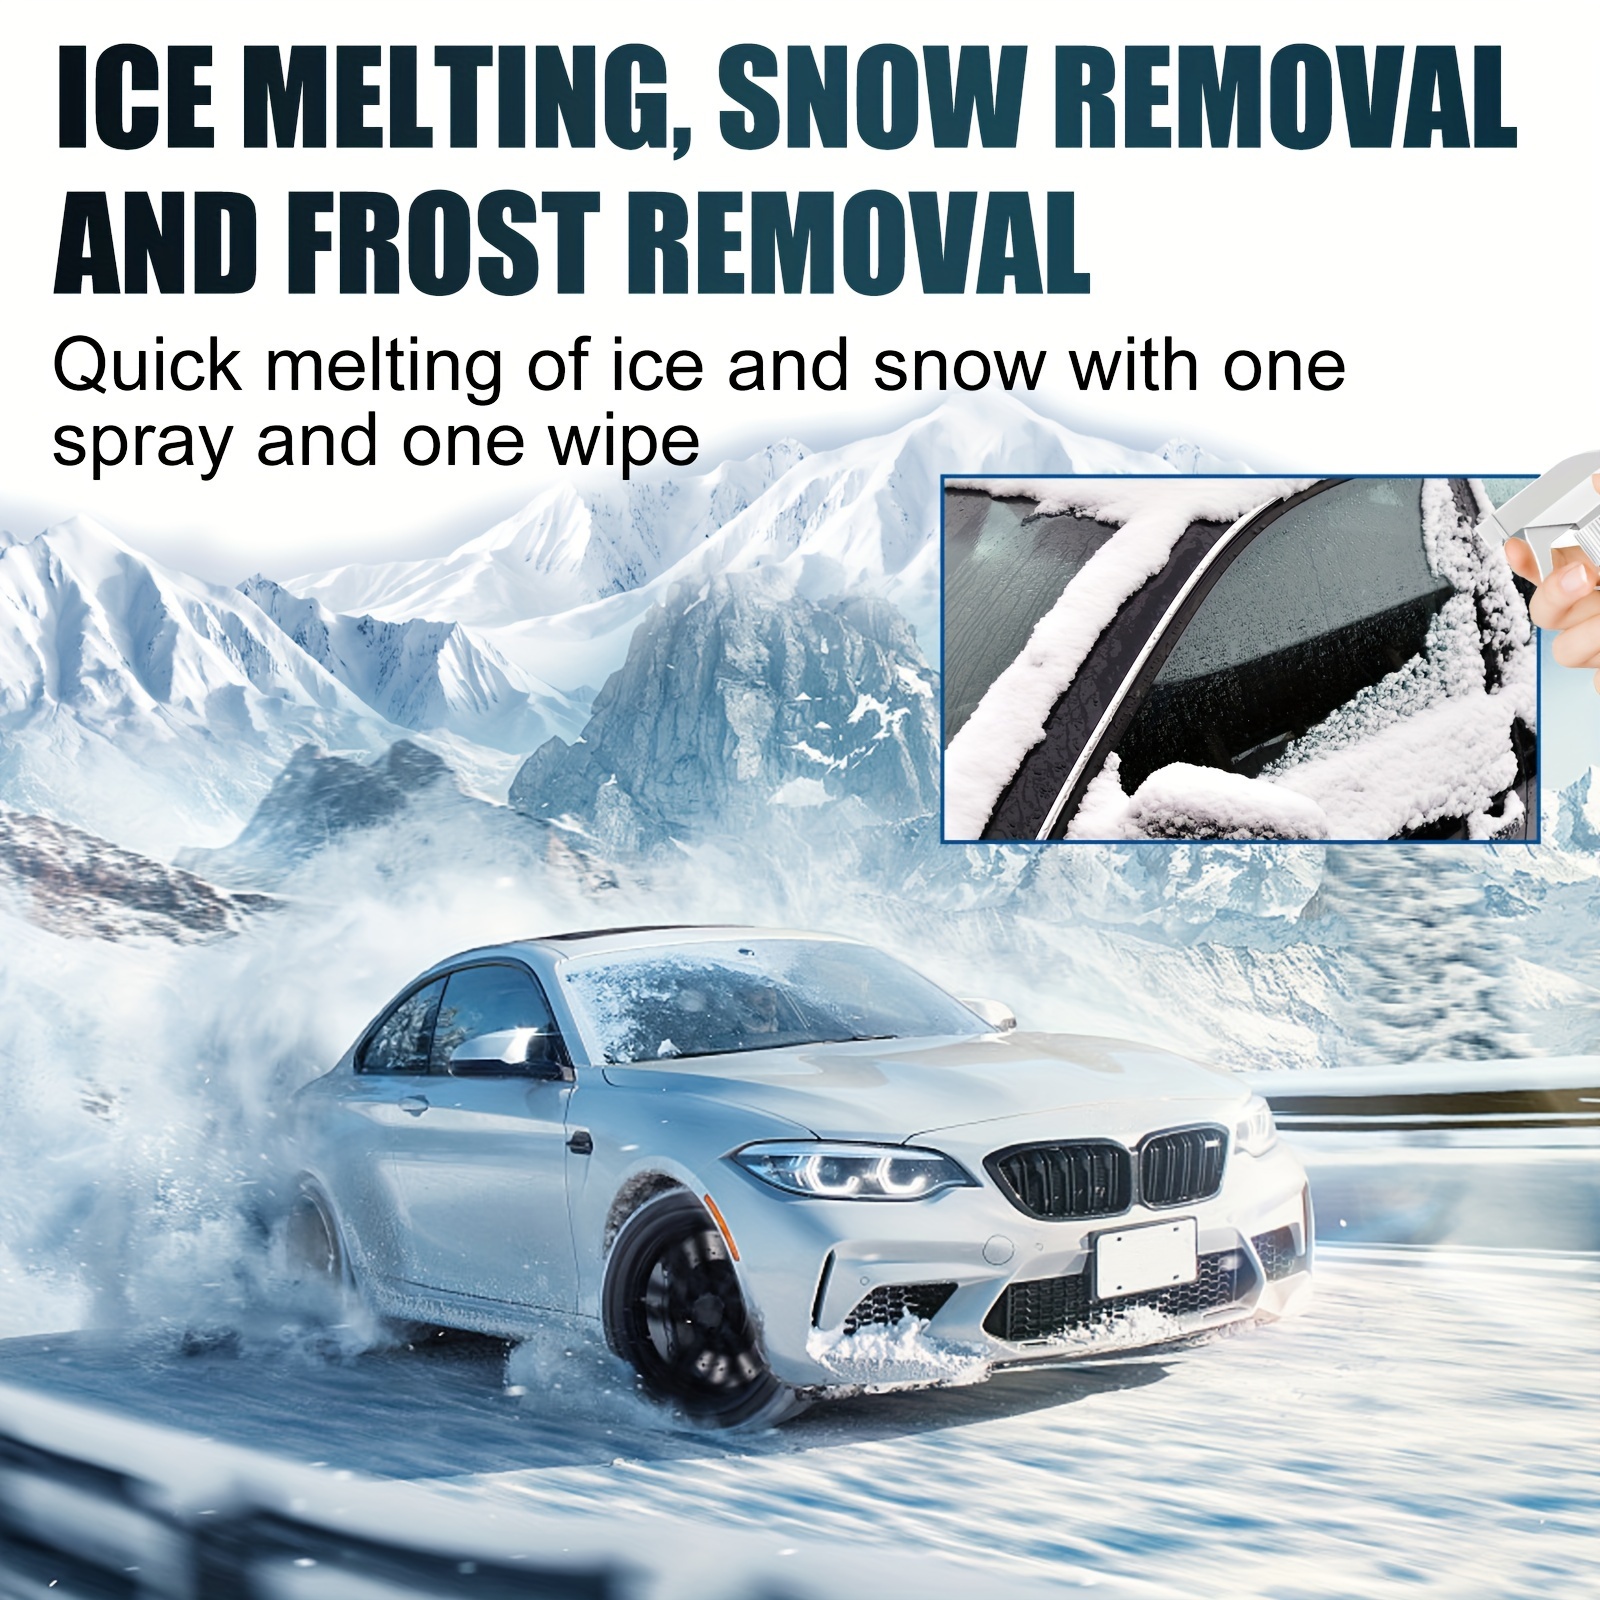 Deicer For Car Windshield Deicing And Snow Melting Agent Windshield Glass  Defroster And Deicing Agent Effective